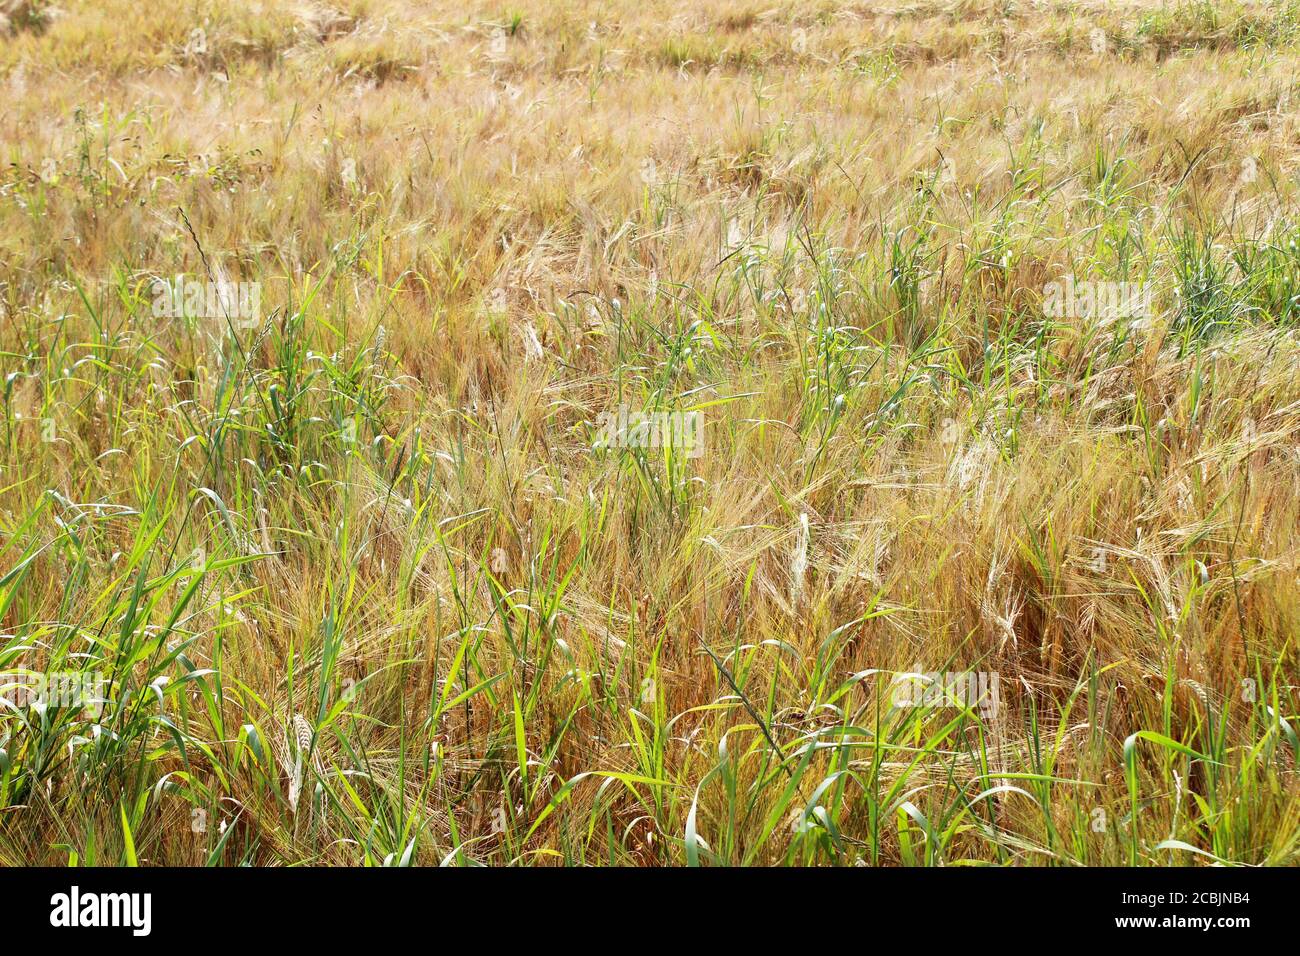 Golden rye field (Secale cereale) on a sunny day in Pickmere, England Stock Photo